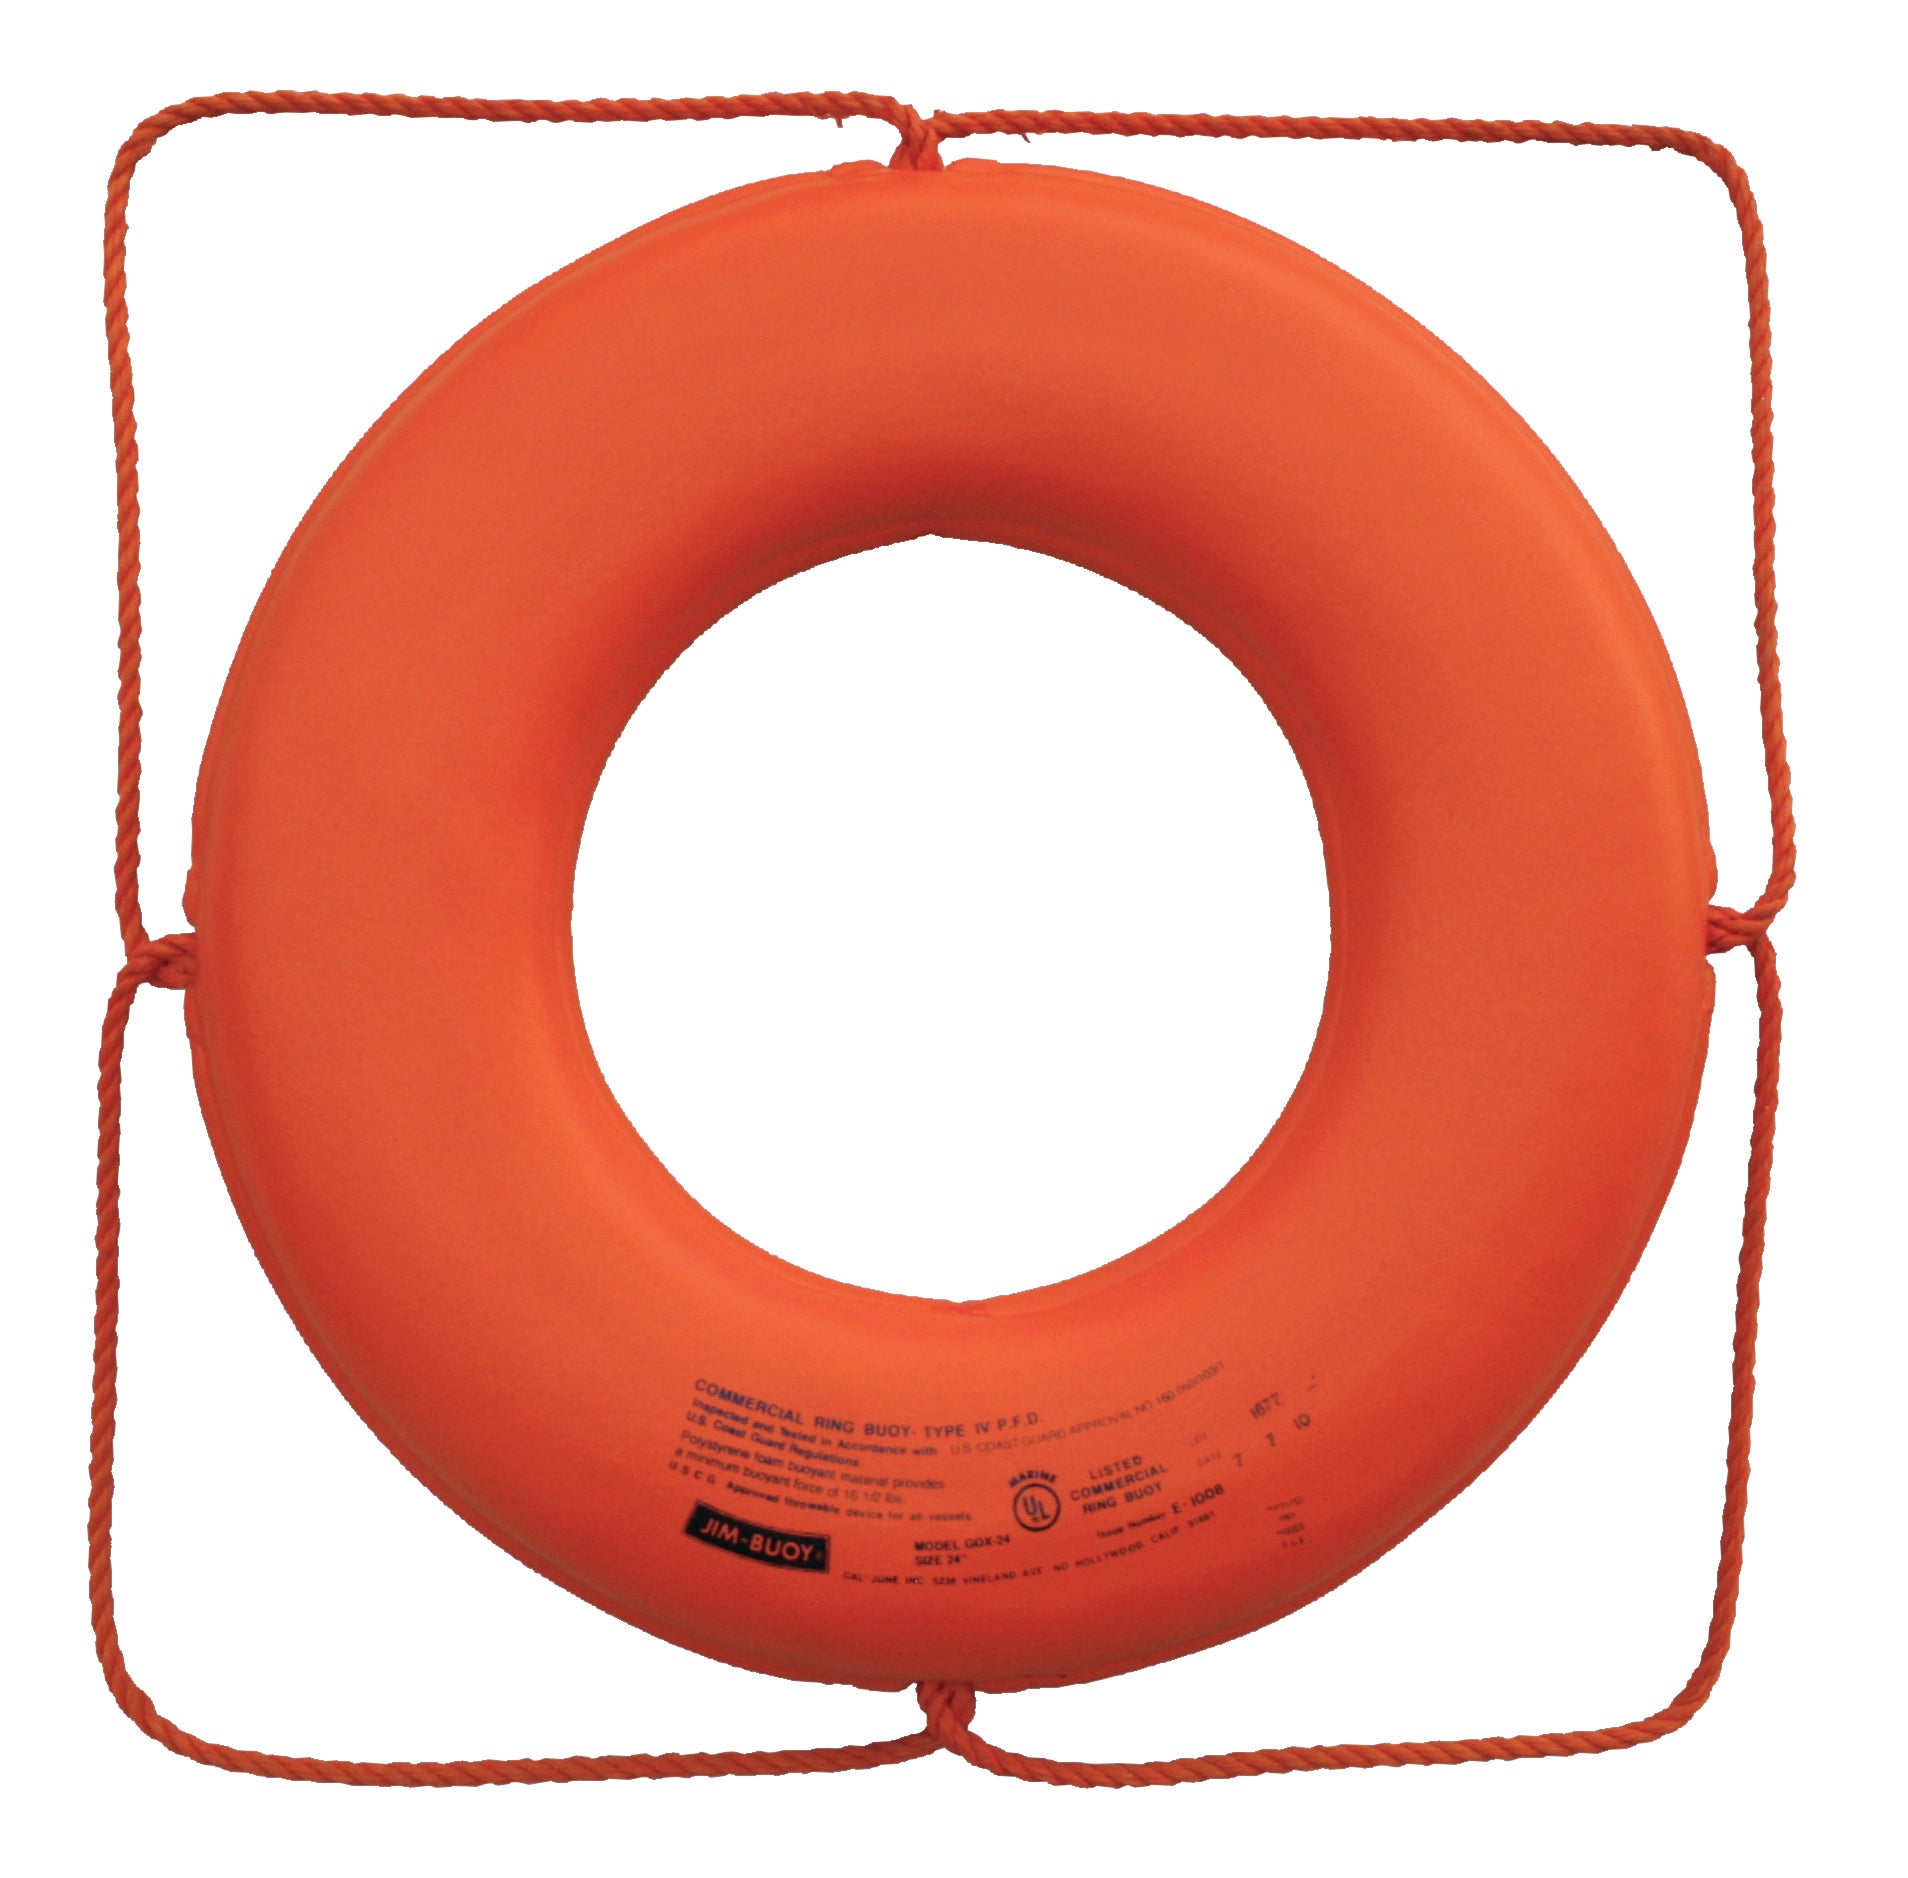 Jim-Buoy GO-X-30 GX-Series Life Ring with Rope Molded Into Core - 30", Orange